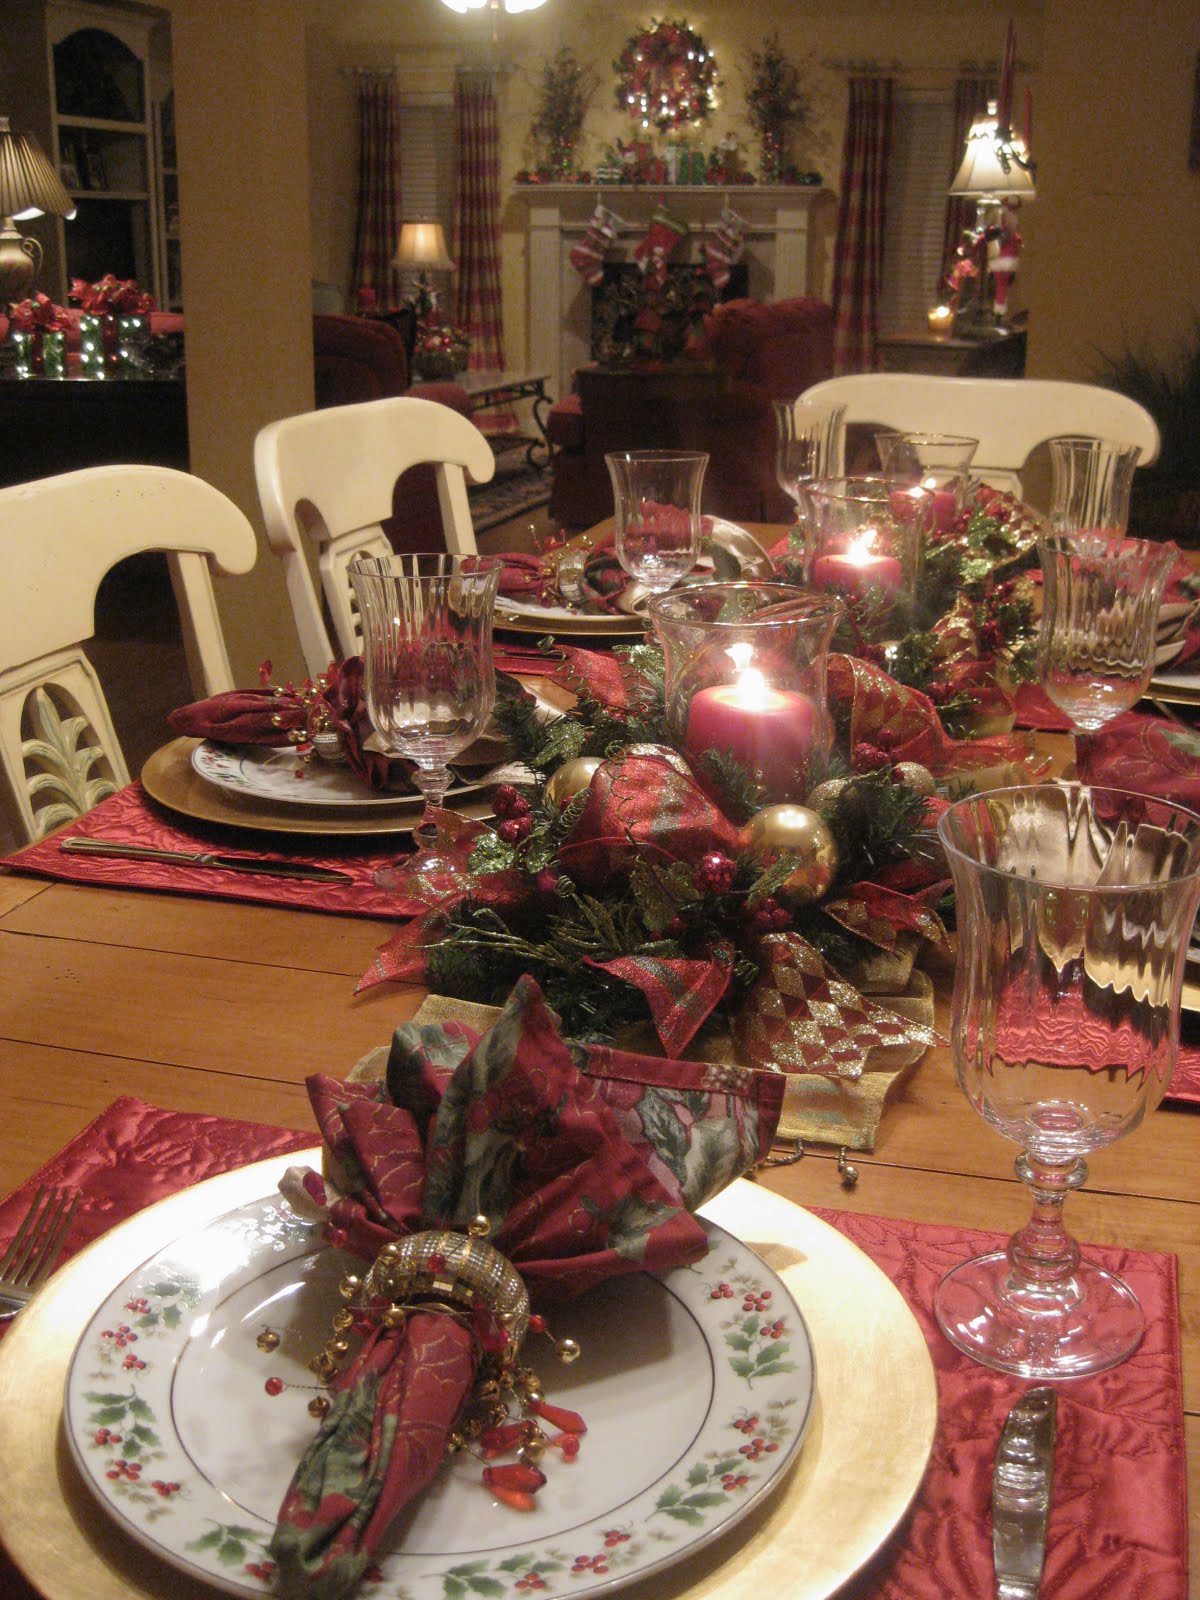 Kristen's Creations: ~~Christmas Day Tablescapes~~